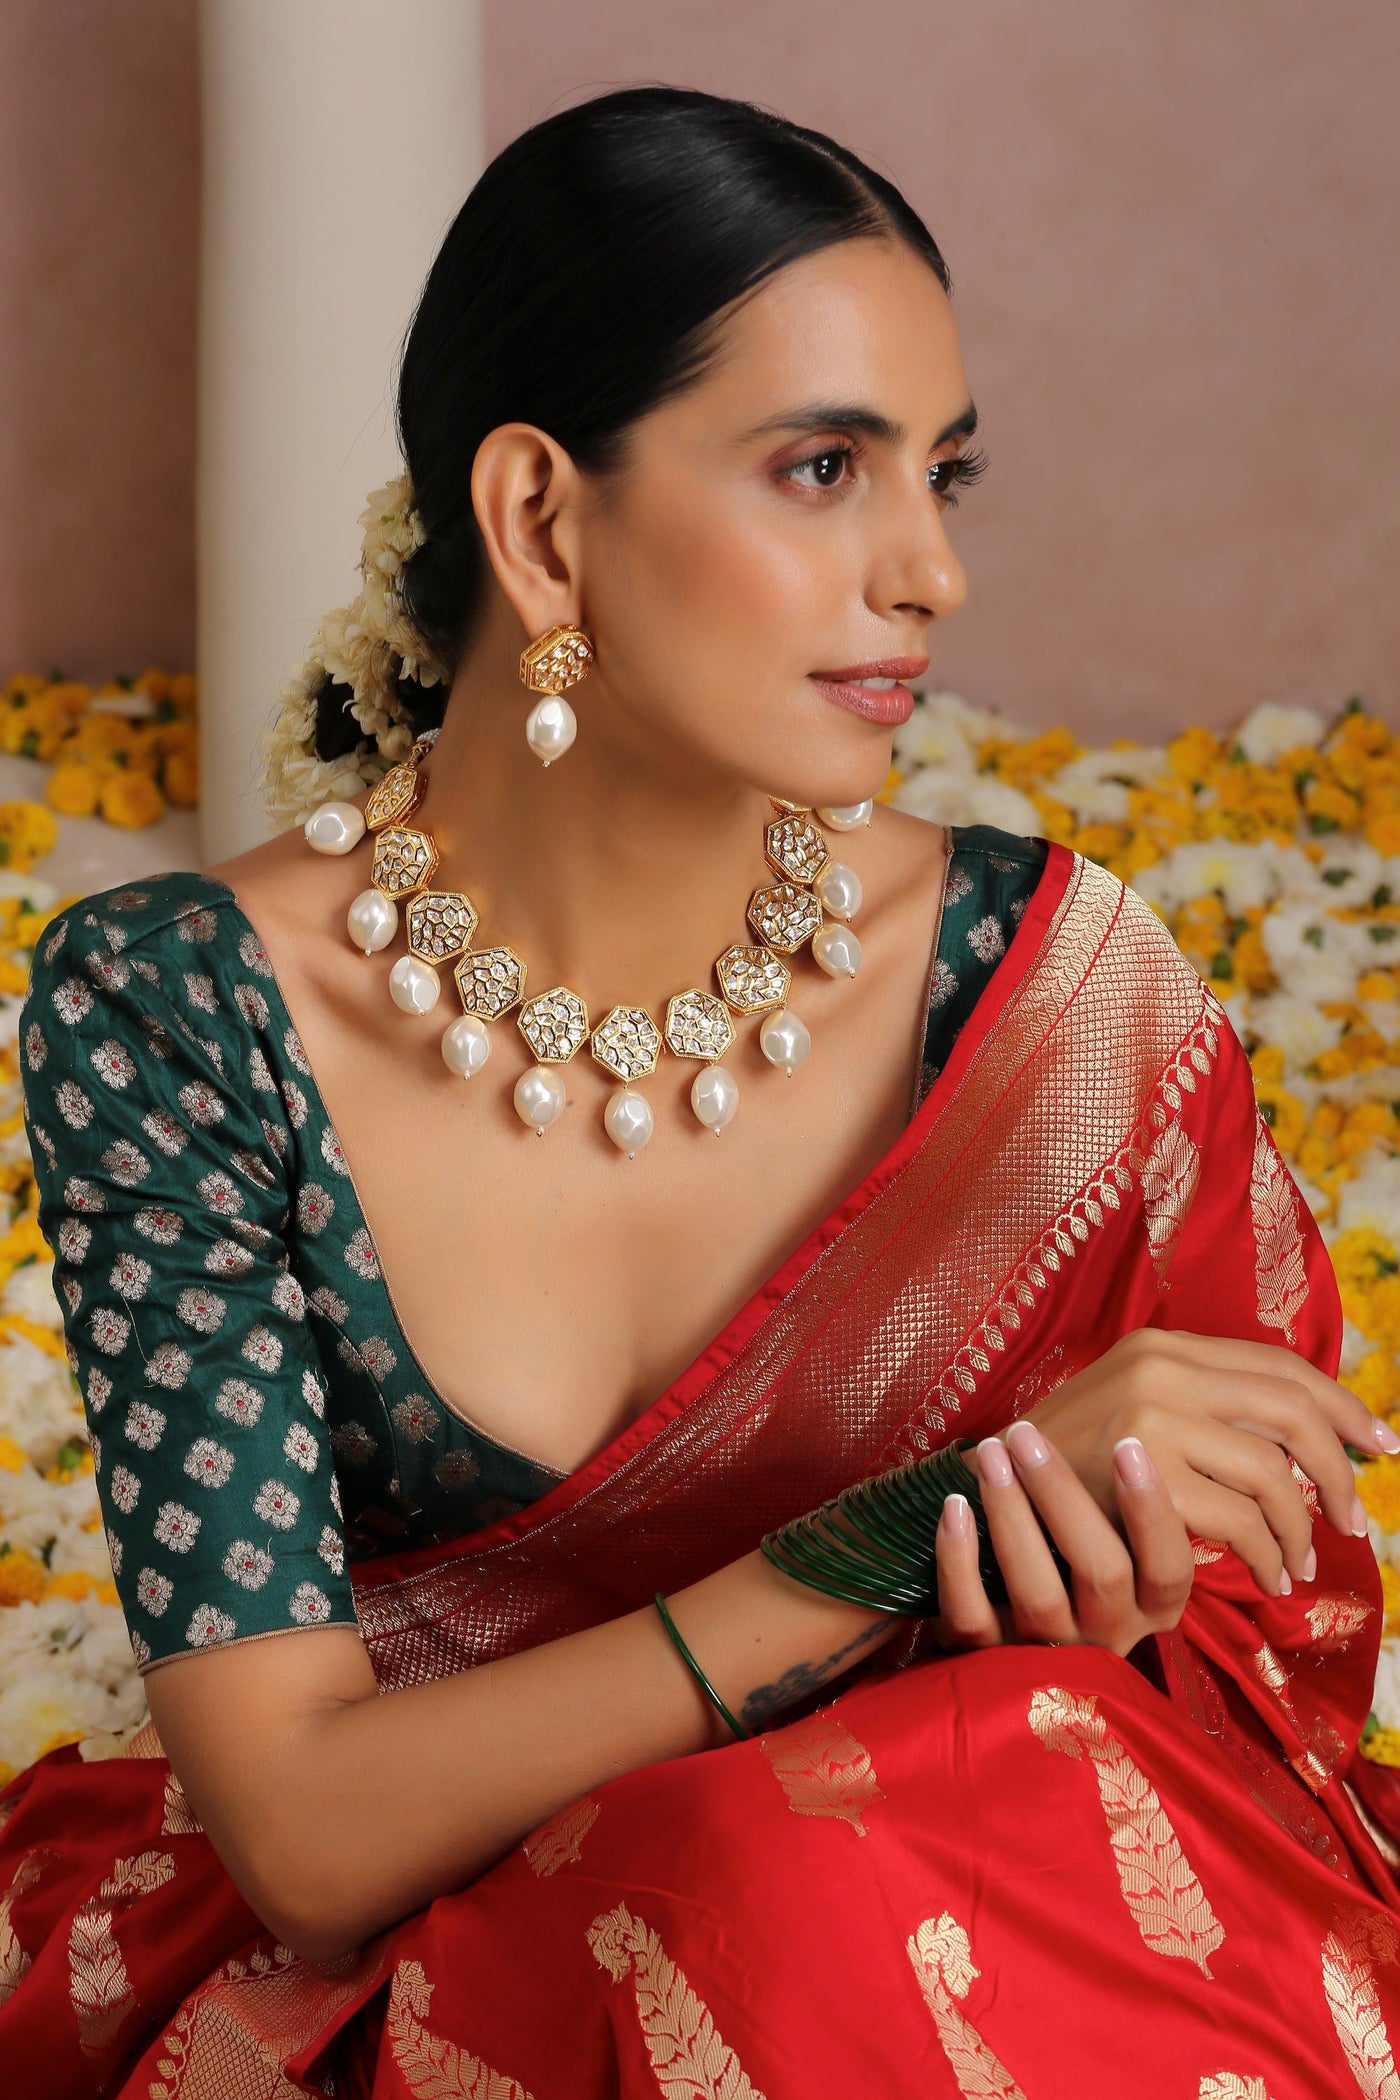 Omaani Gold Plated Kundan and Pearl Necklace Set